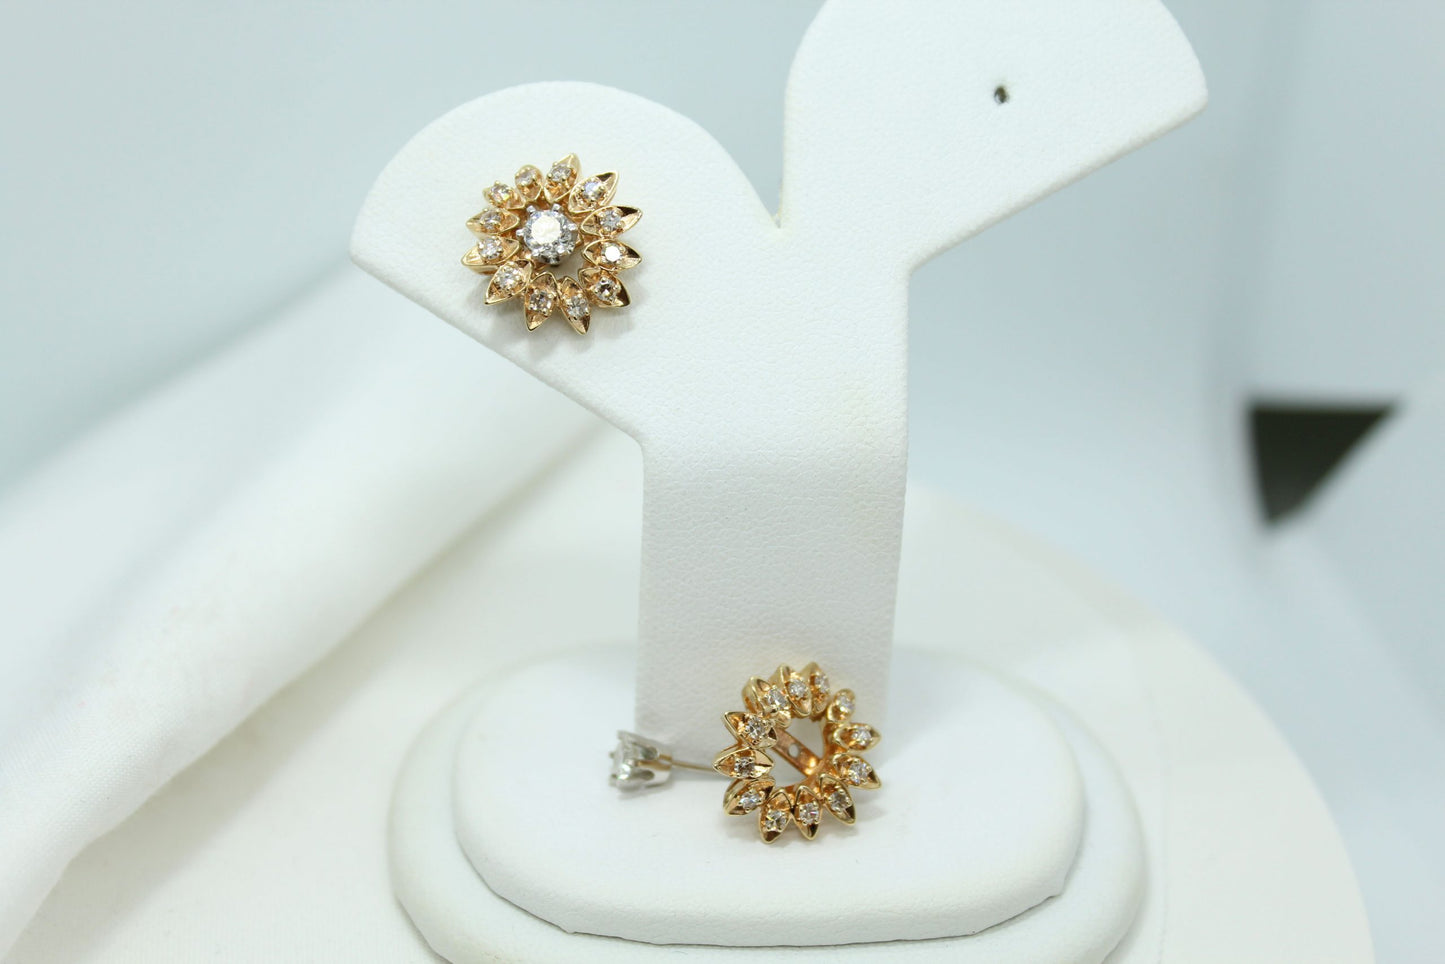 .40CT Diamond TW 14KT WG Stud Earrings Only (Jackets Sold Separately)